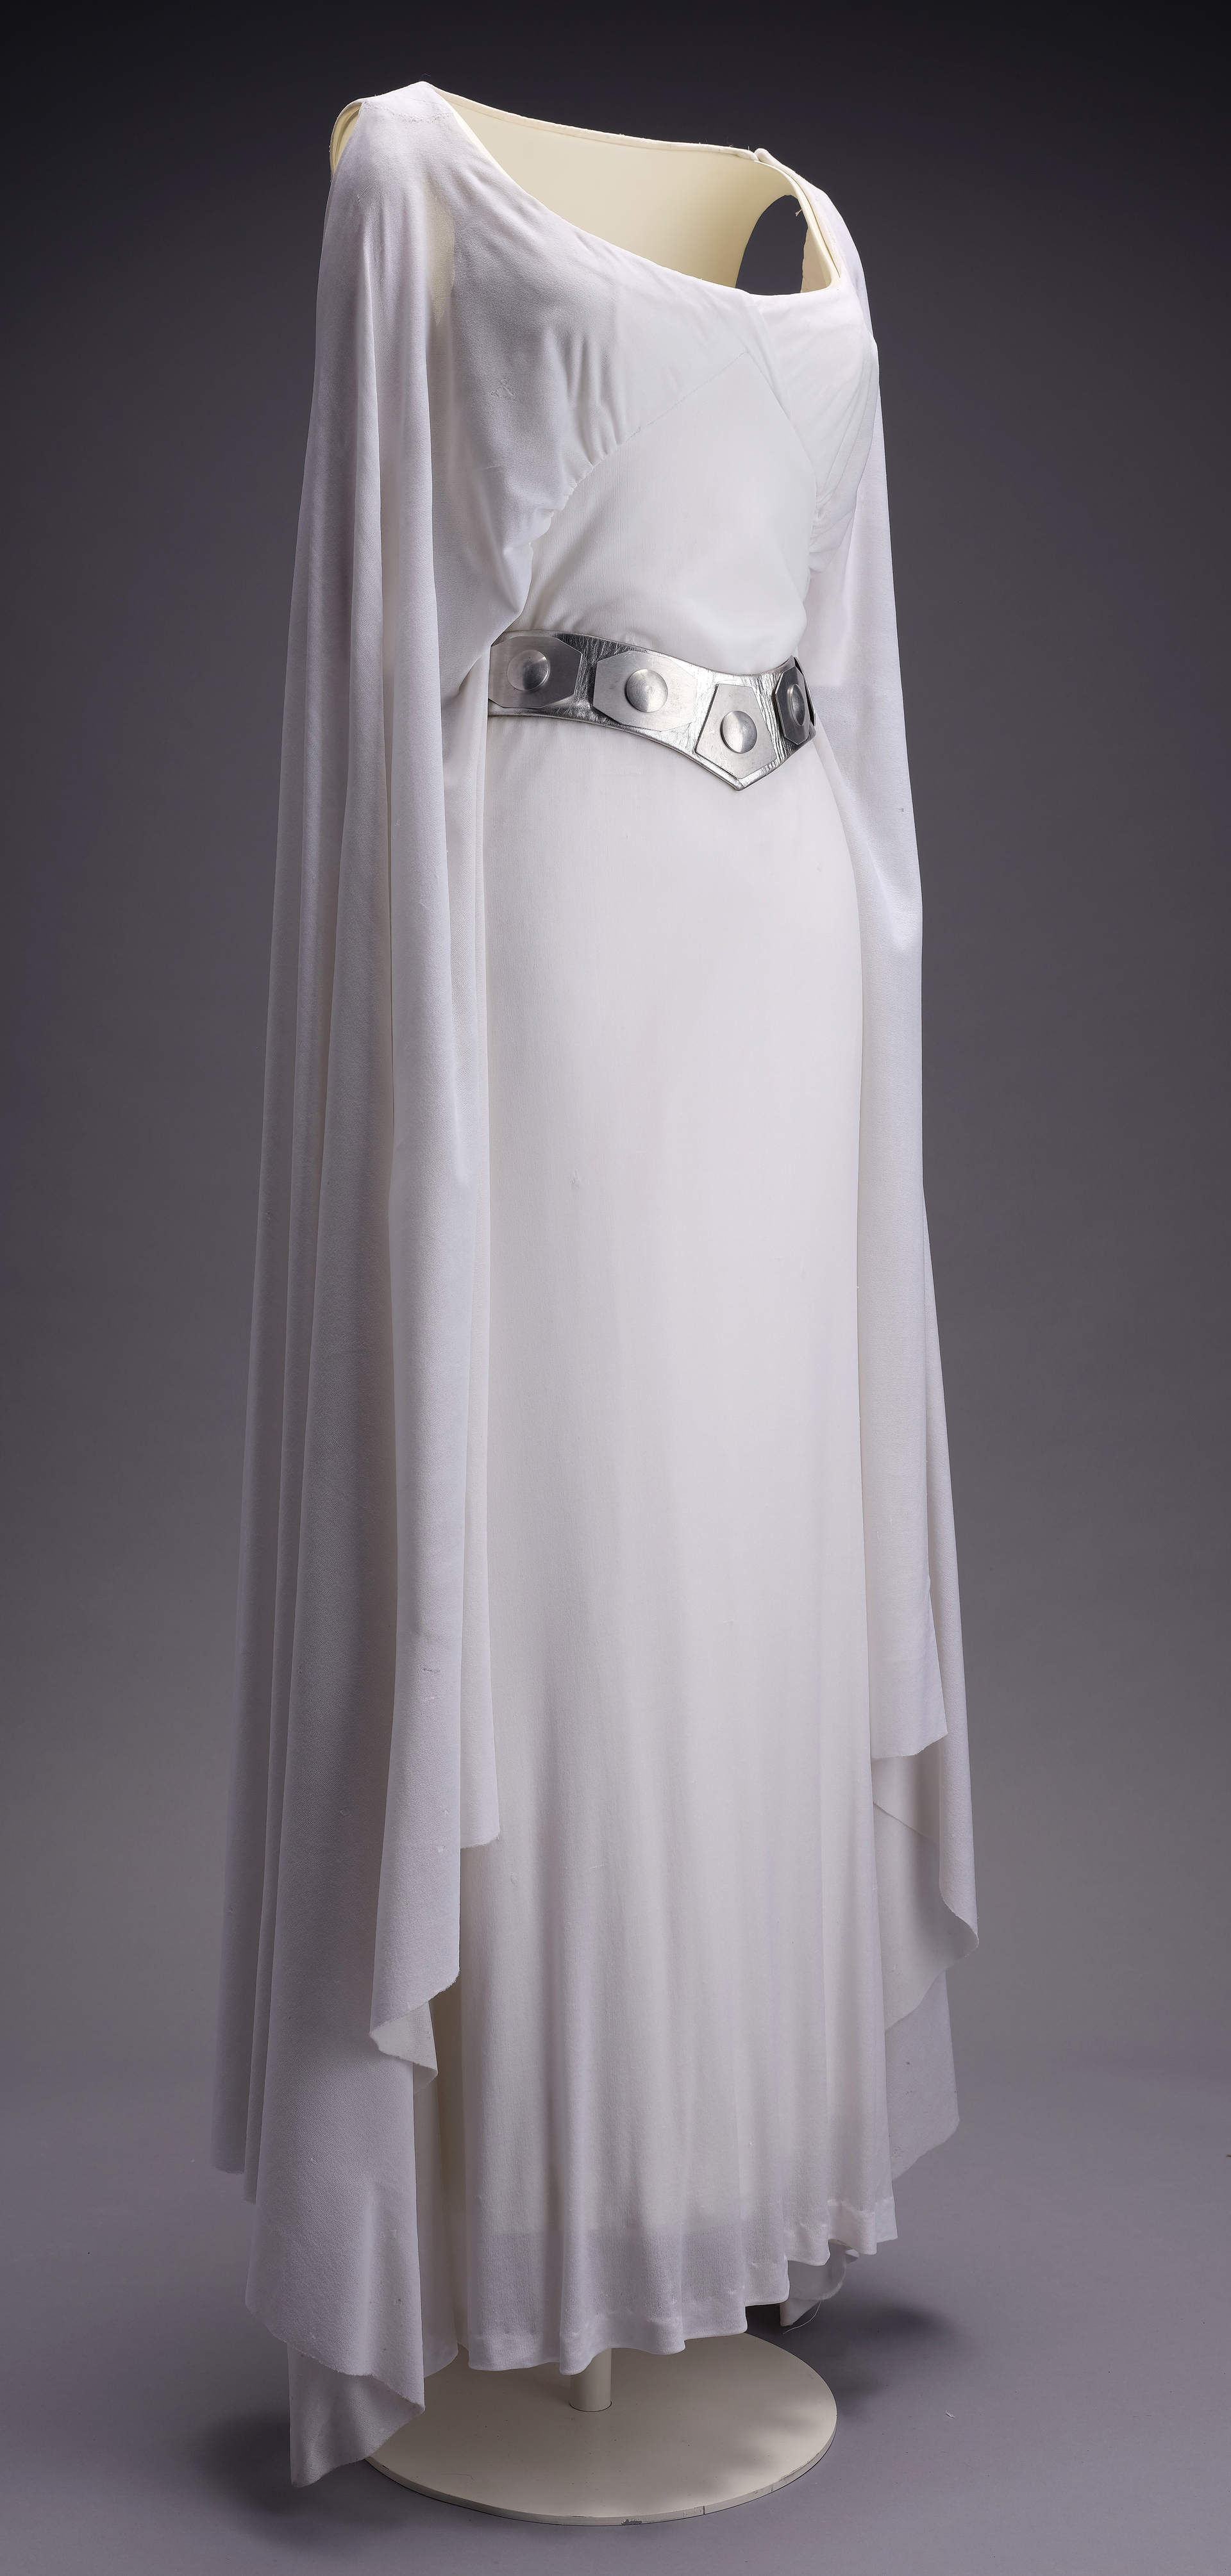 STAR WARS: A NEW HOPE (1977) - Princess Leia's (Carrie Fisher) Screen-Matched Ceremonial Dress - Image 16 of 39